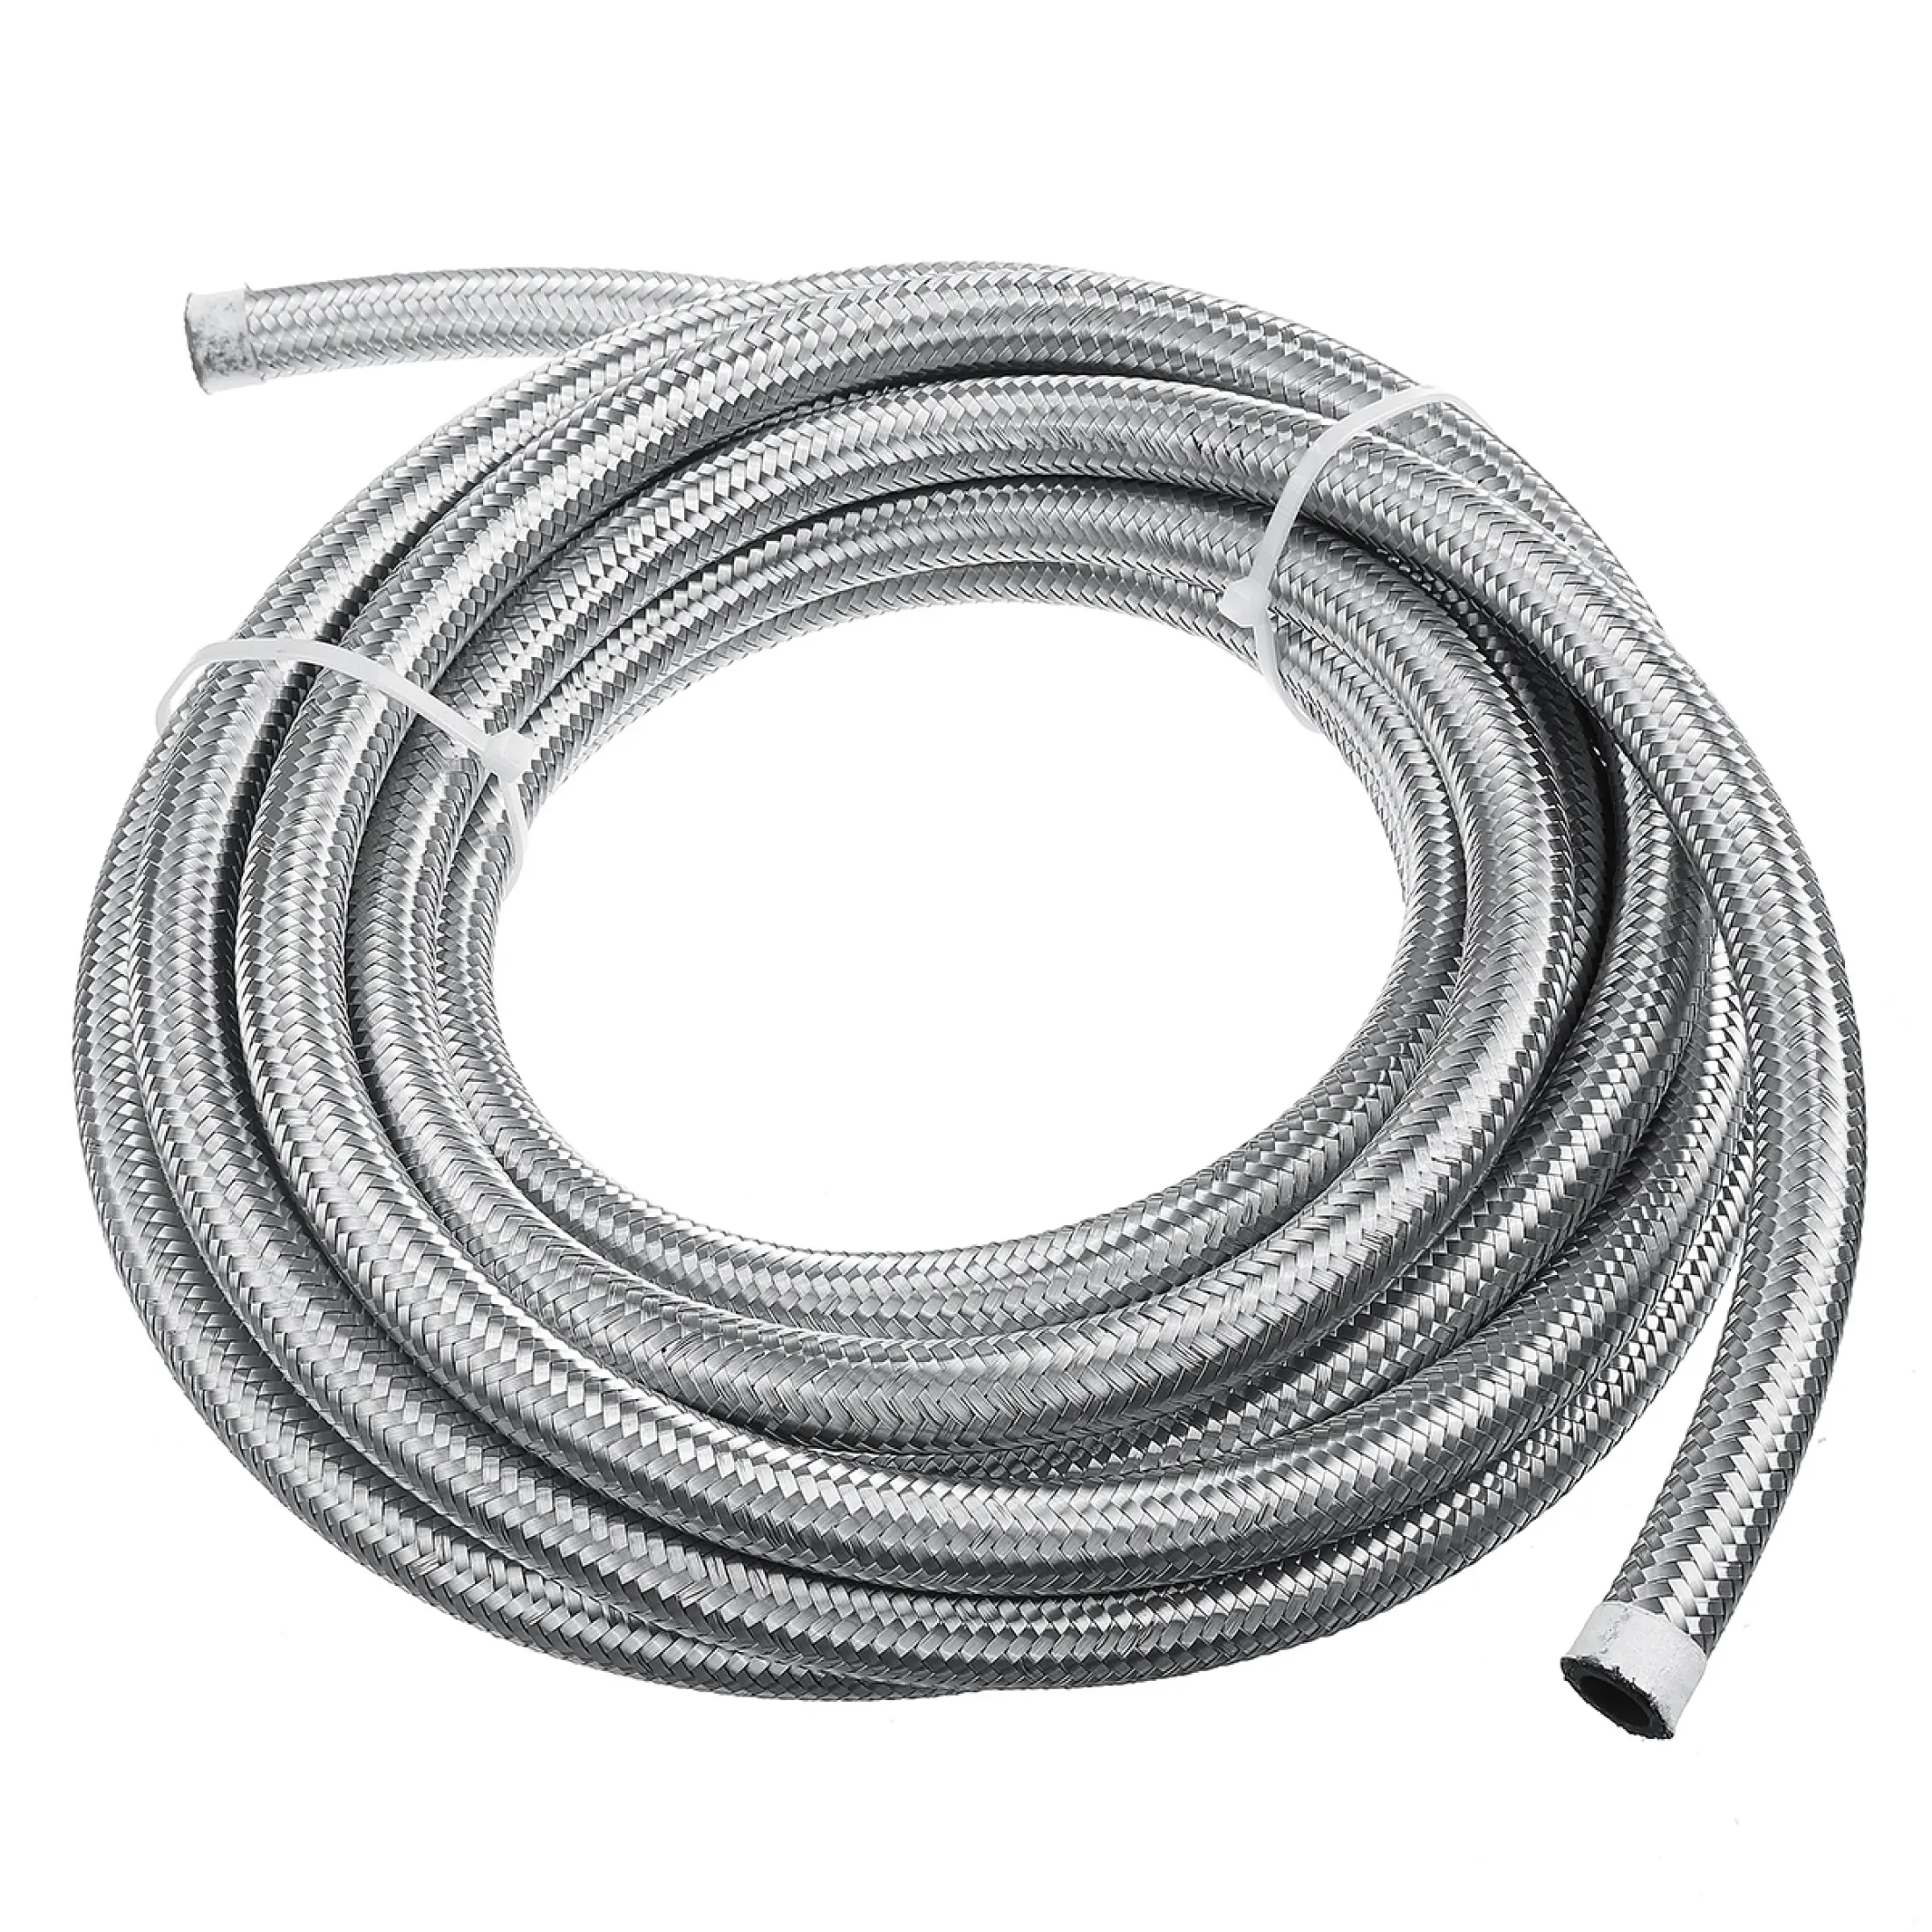 AN8-8AN AN-8 Stainless Steel Nylon Braided Oil Fuel Hose Line 16FT KIT 3000PSI